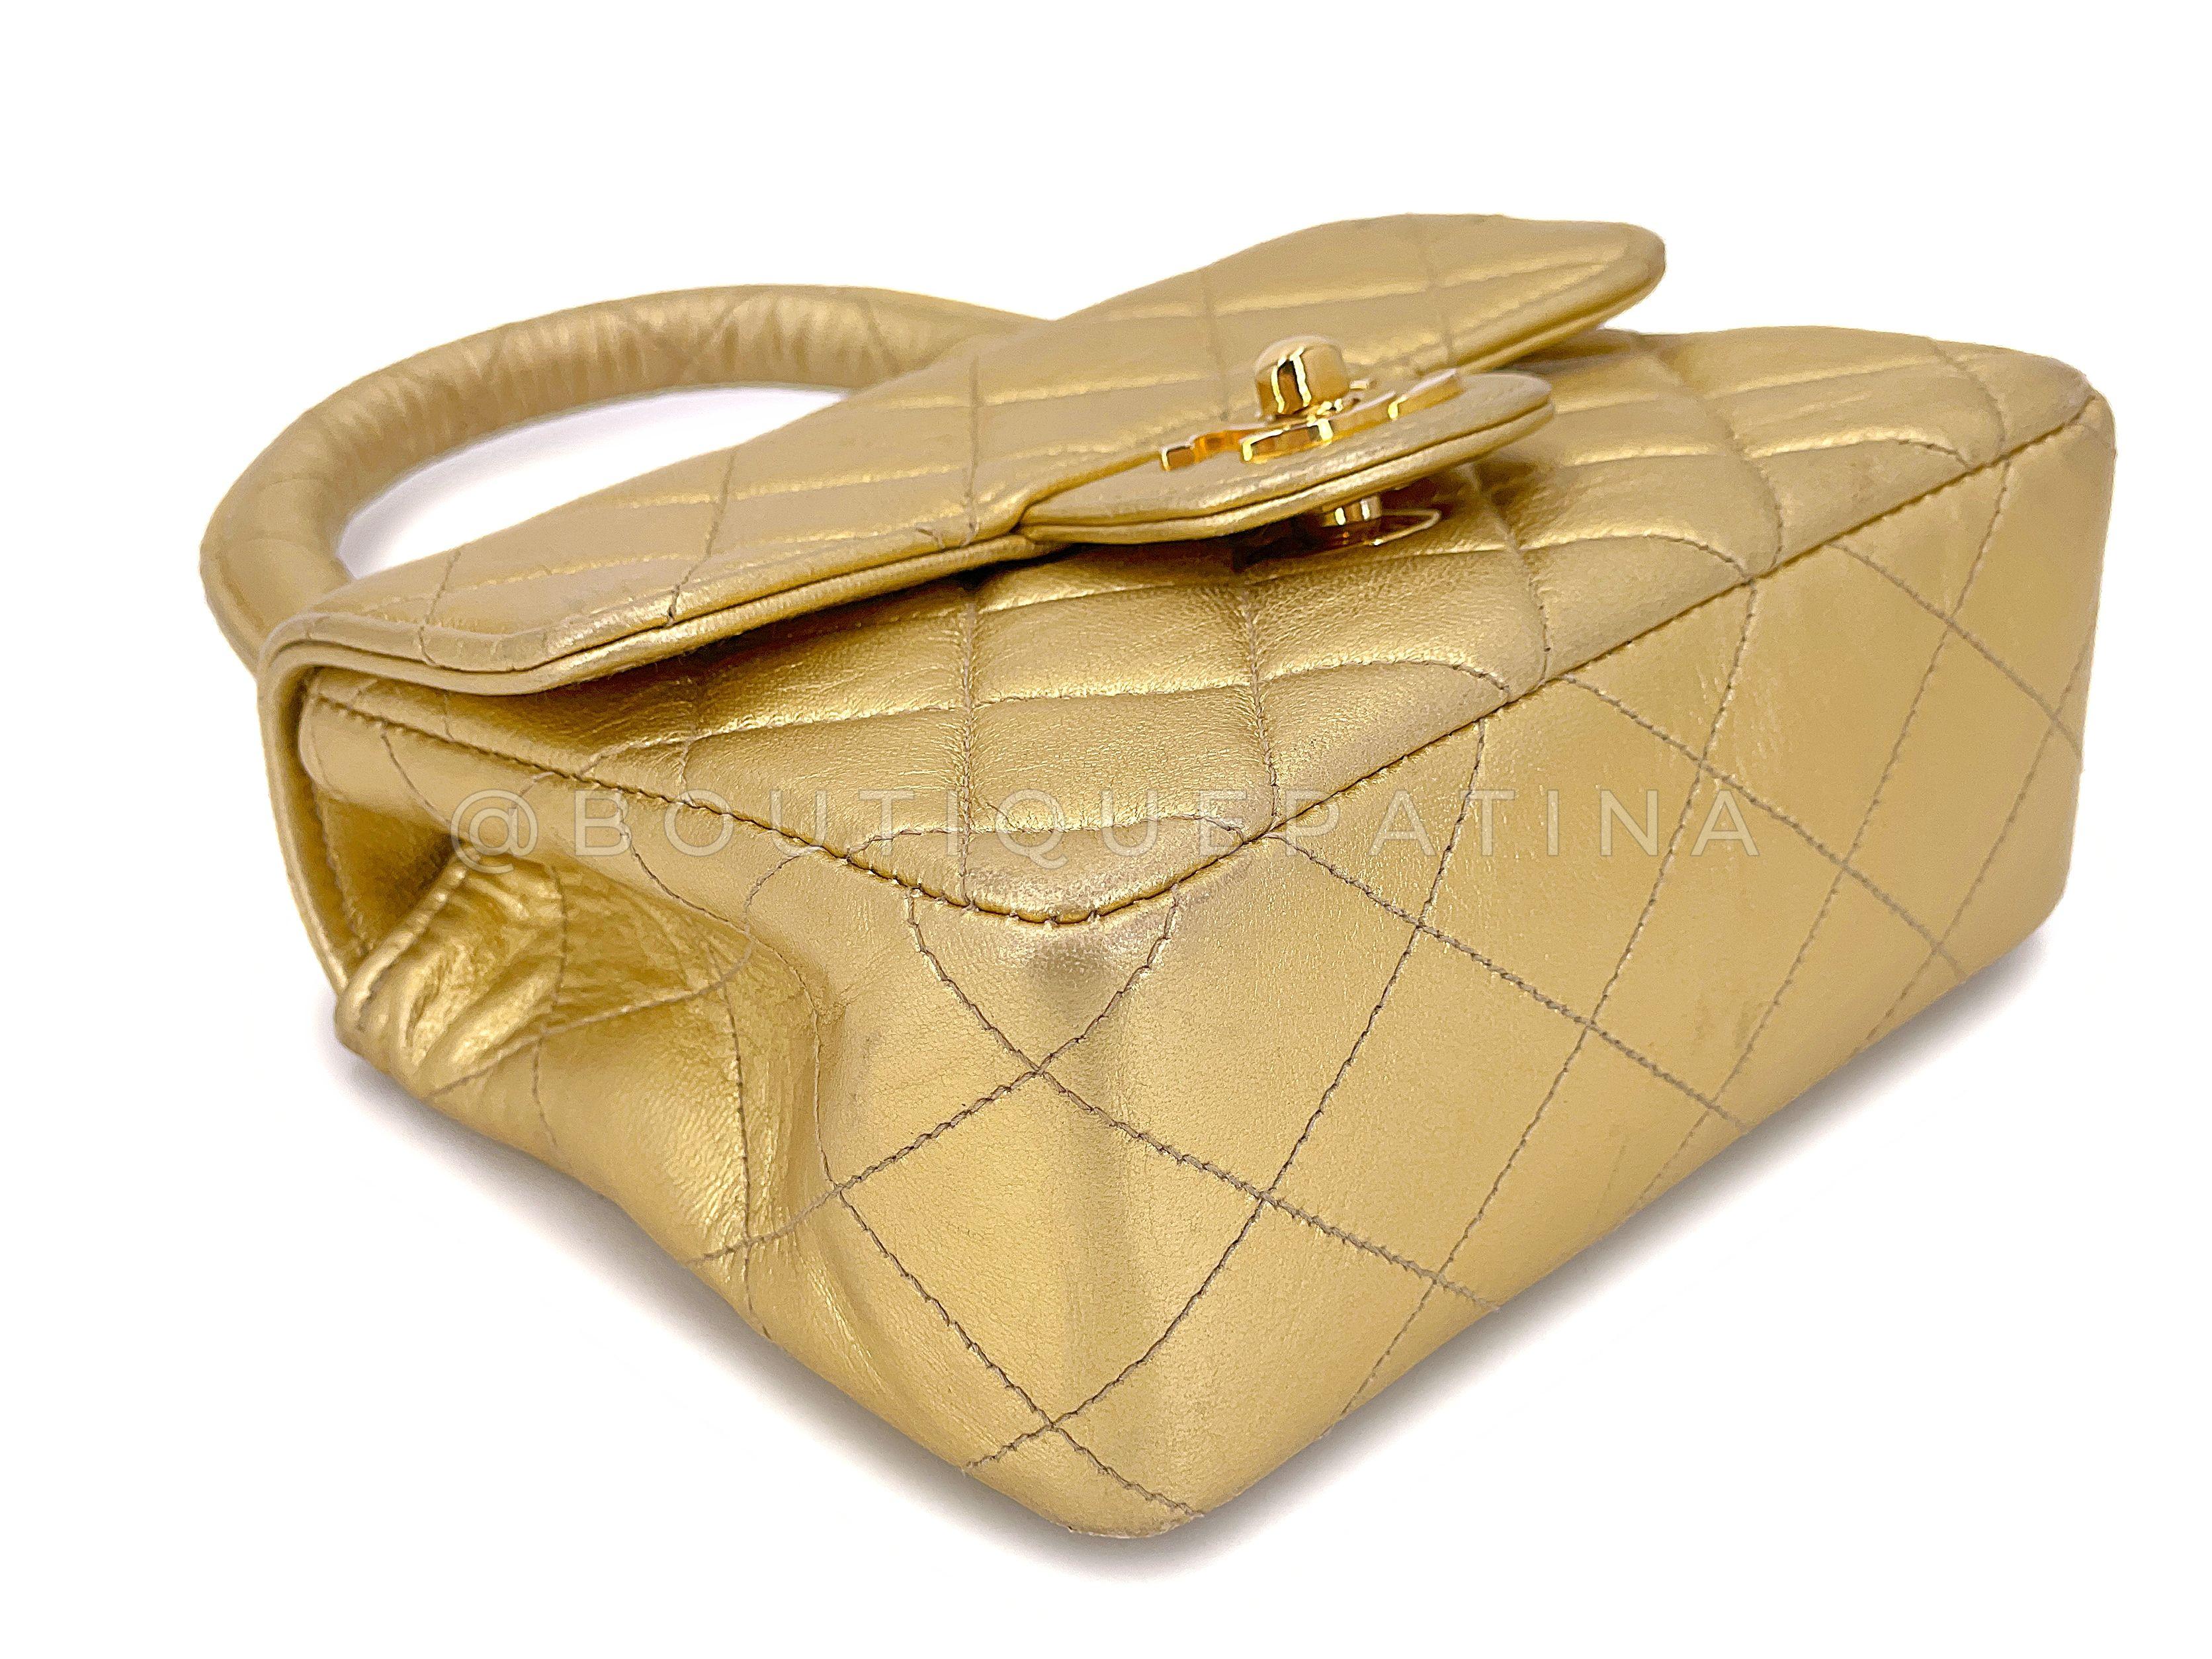 Chanel 1994 Vintage Gold “Child” Extra Square Mini Kelly Bag 67404 For Sale 2